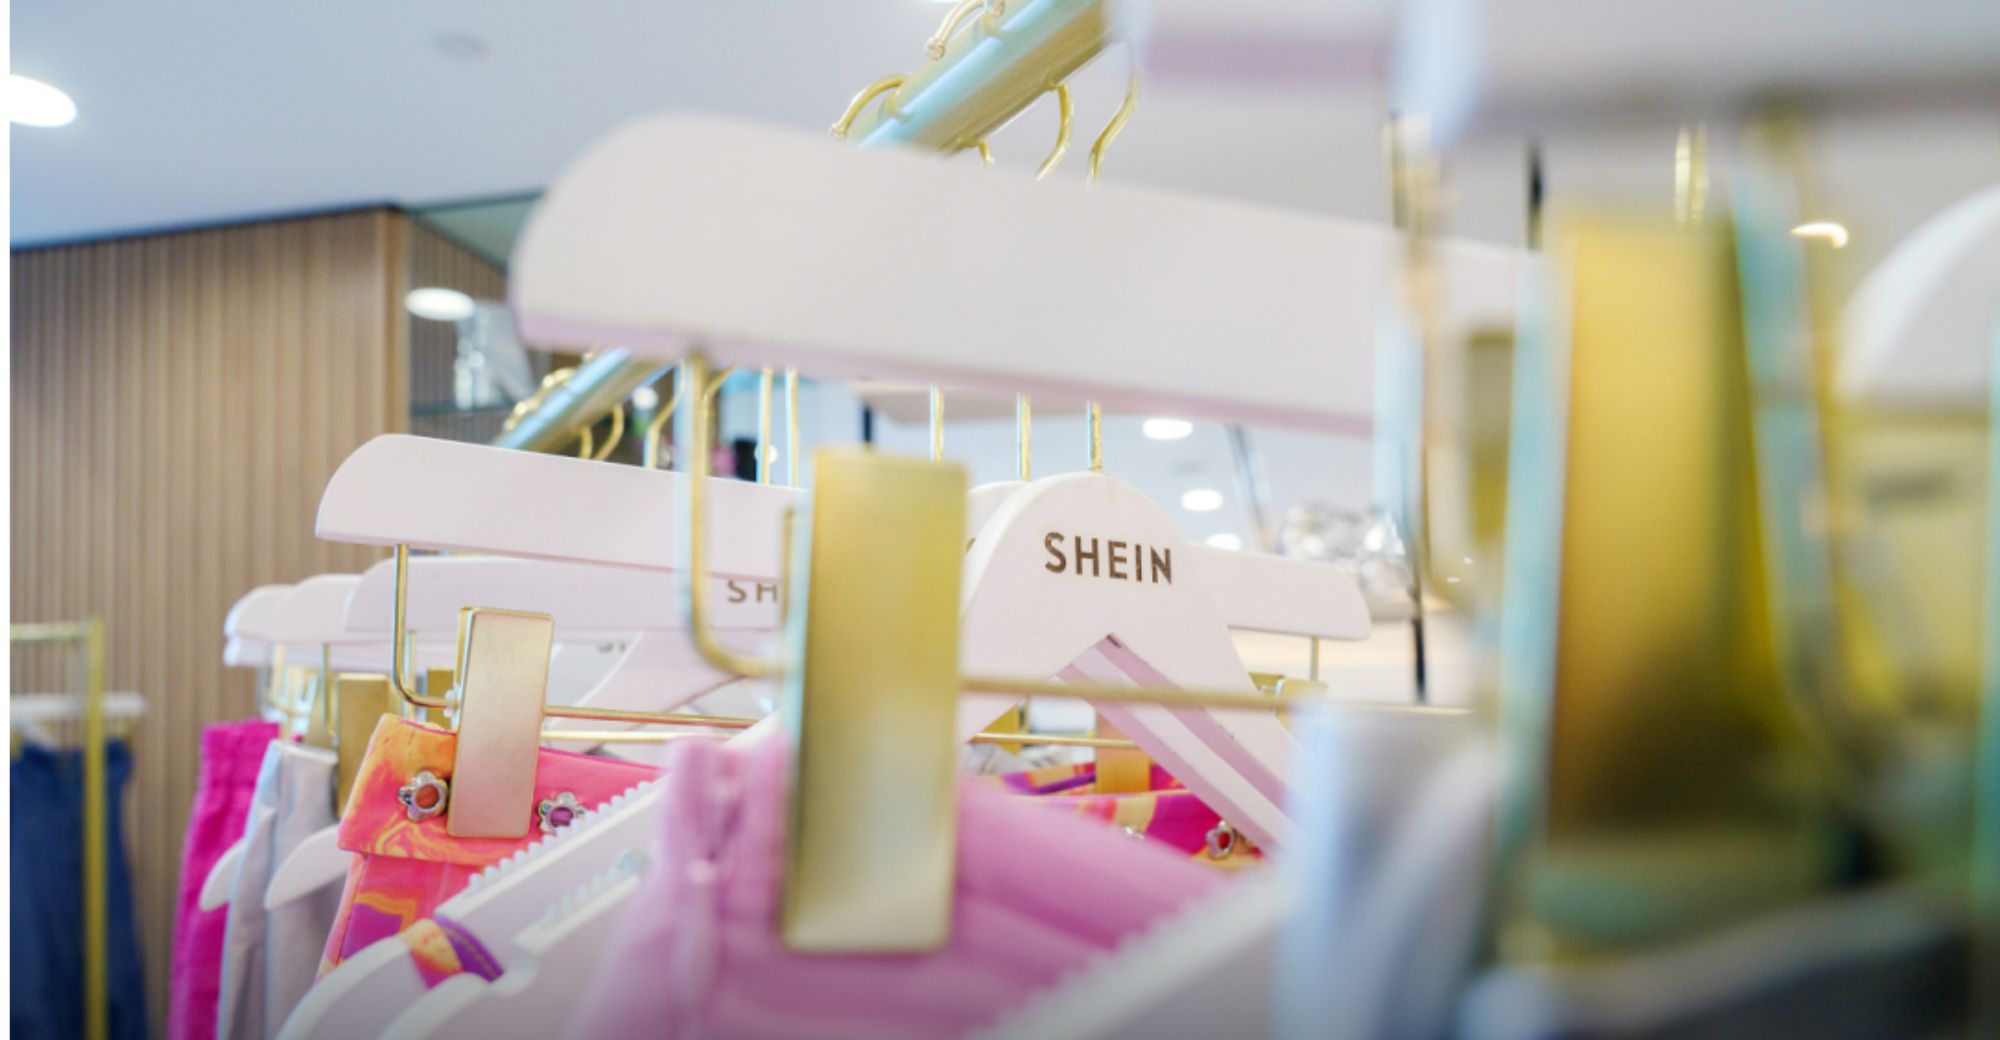 SHEIN Invests in Forever 21’s Parent Company, Expands Offline Presence